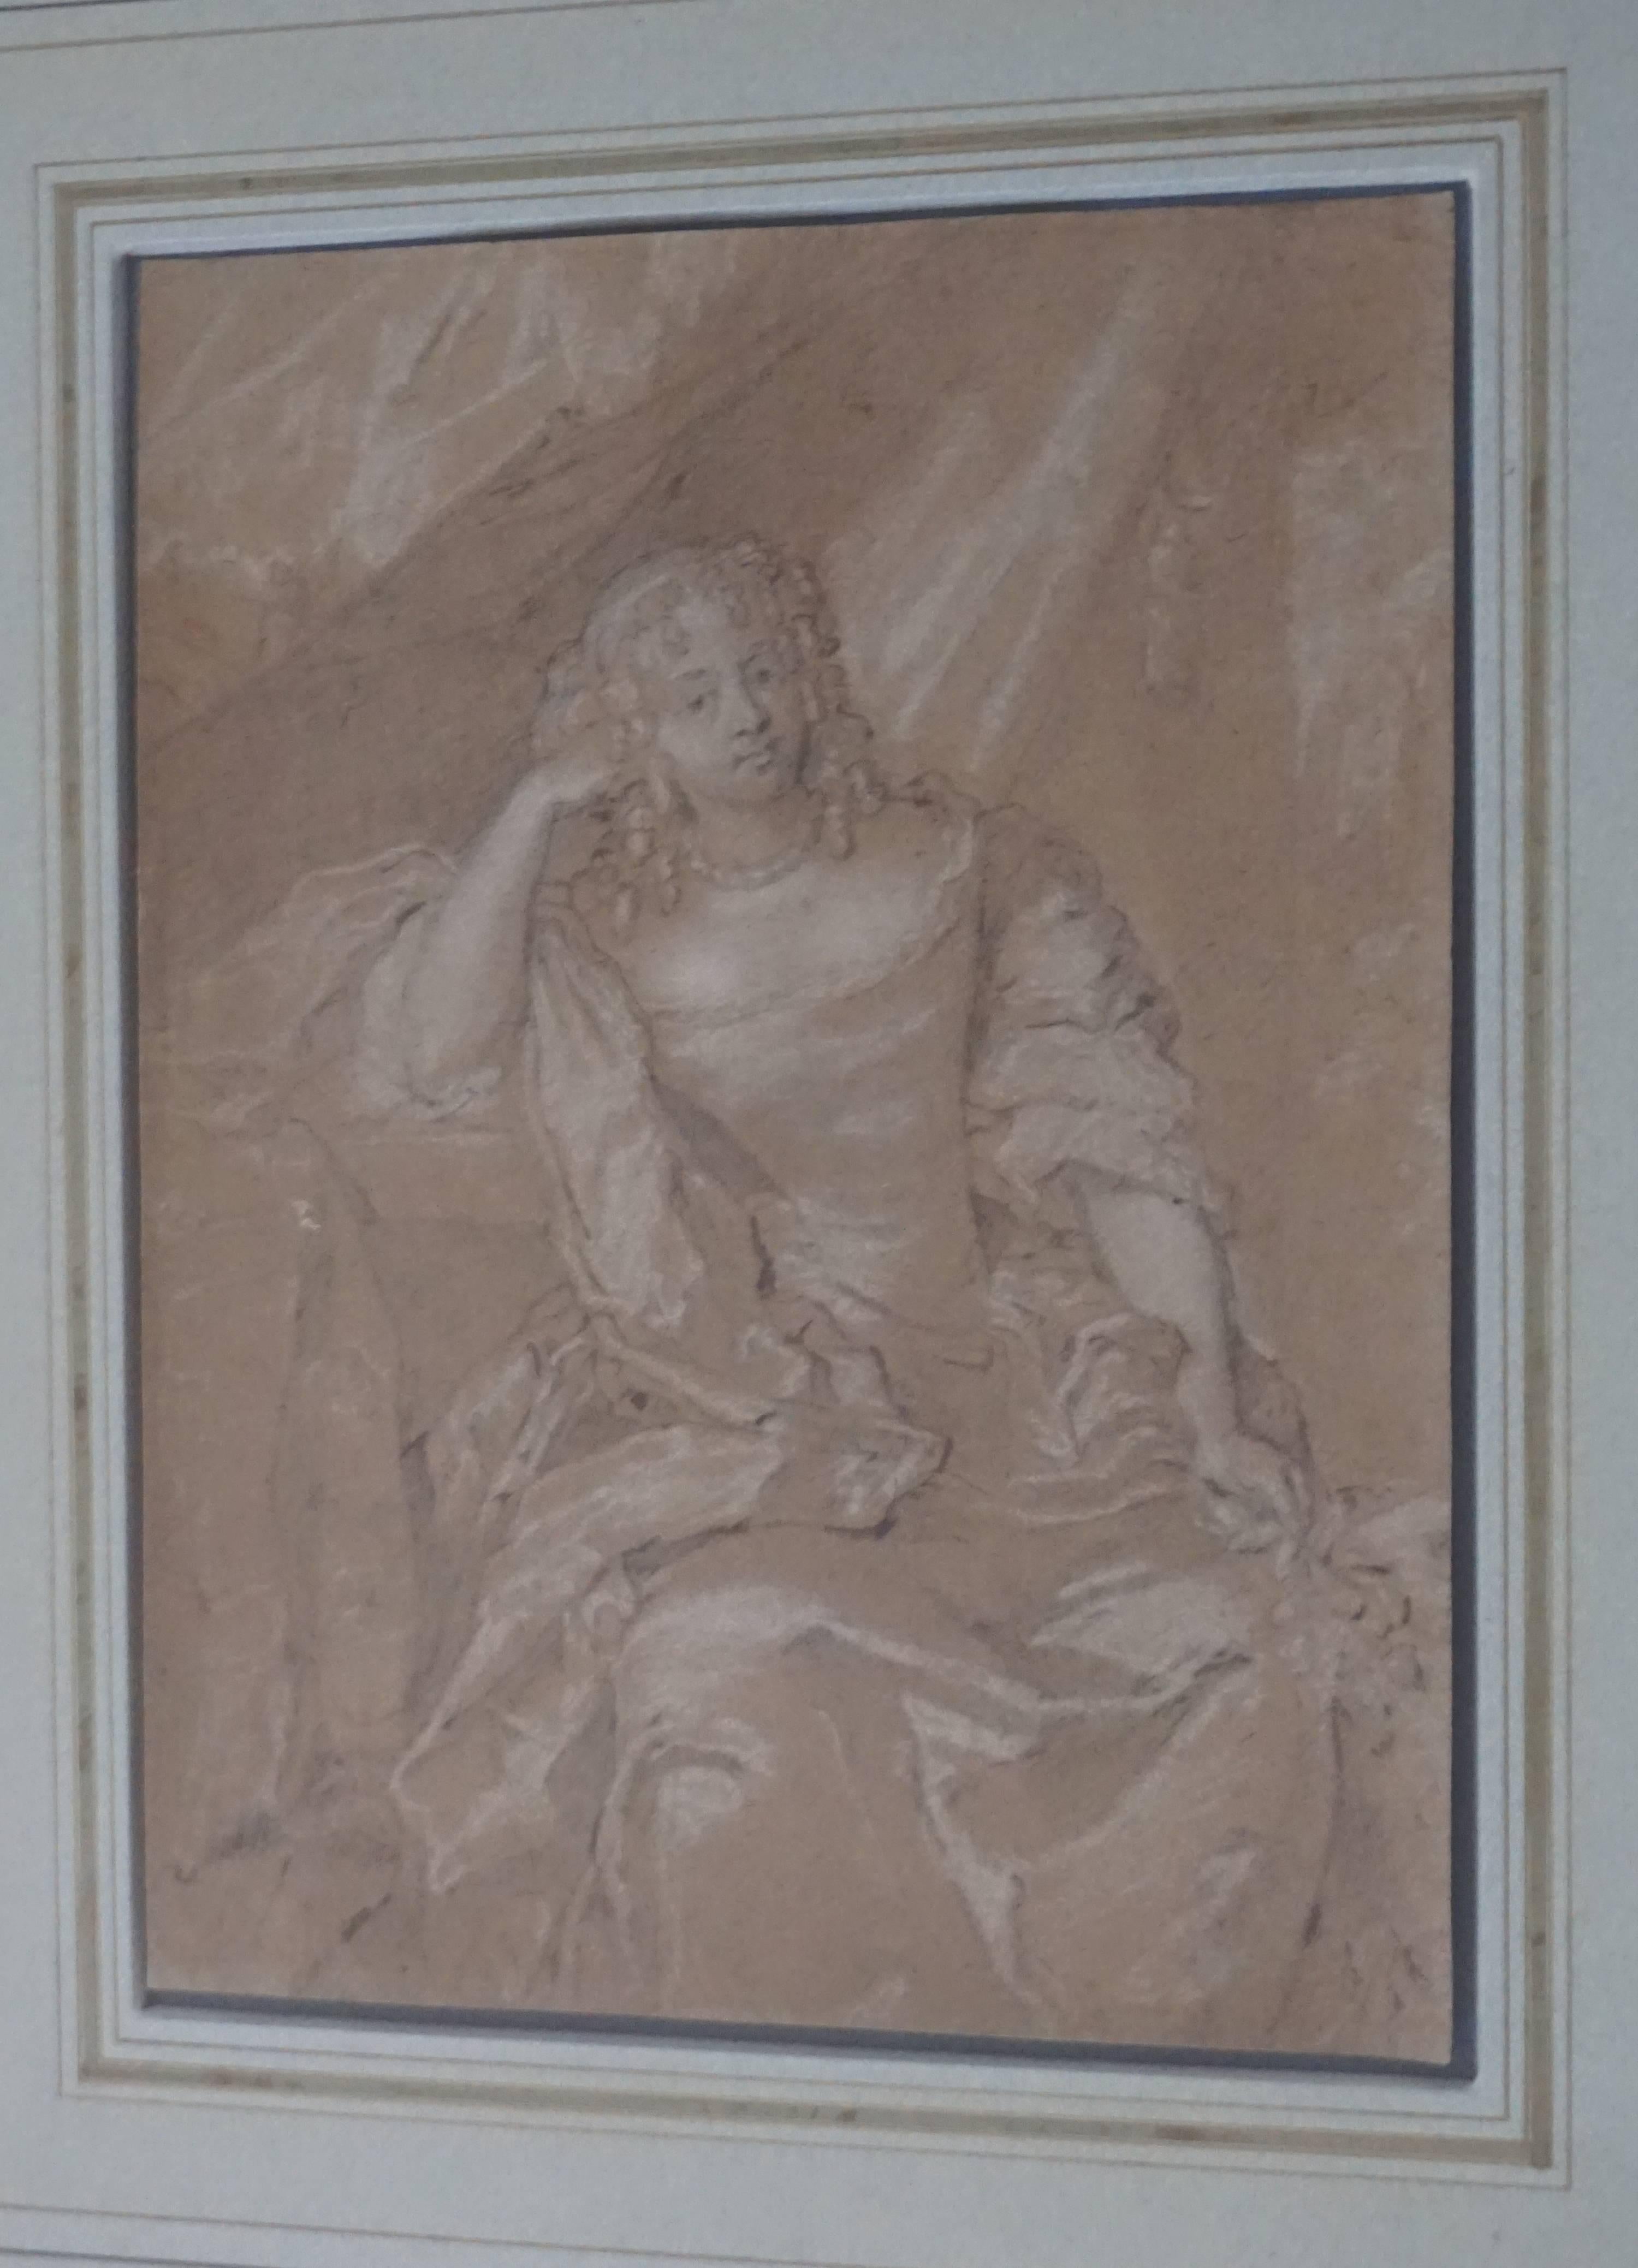 Charcoal and chalk portrait drawing on card by renowned Dutch painter Caspar Netscher (Heidelberg/Prague 1639-1684 The Hague) depicting a lady of means seated three-quarter-length in a dress with lace chemise, wrap and a pearl necklace, holding a